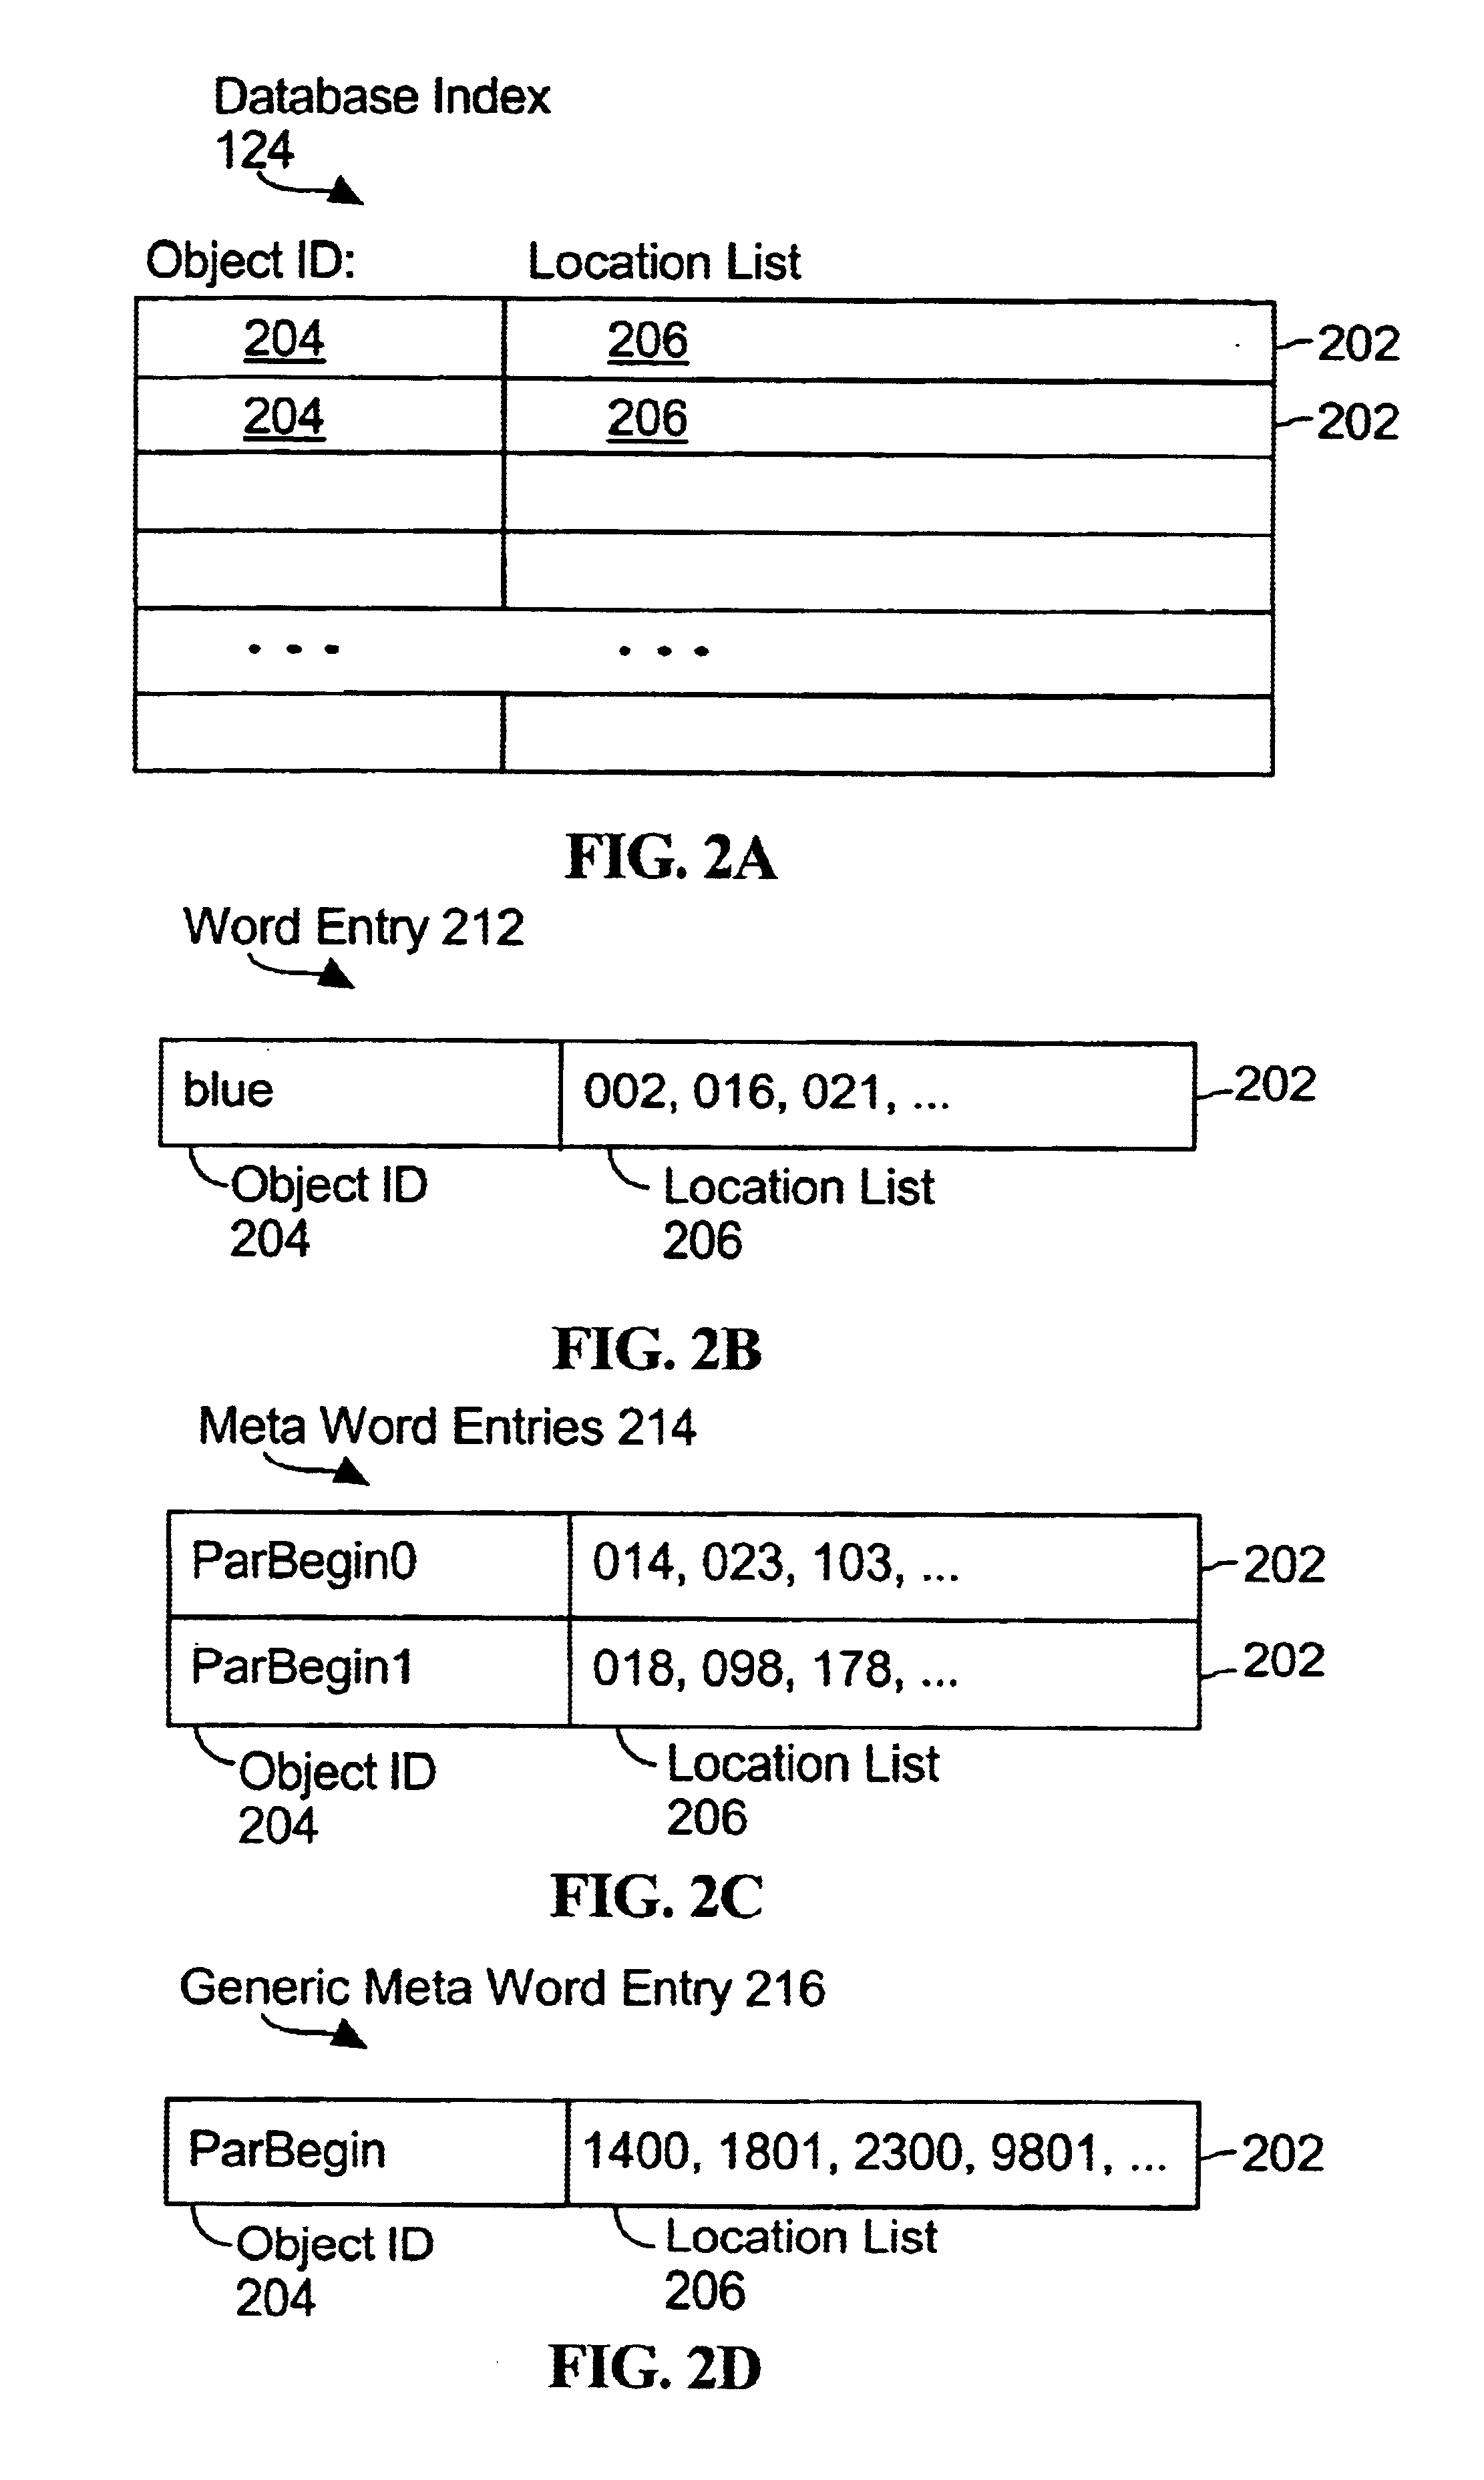 System and method for search, index, parsing document database including subject document having nested fields associated start and end meta words where each meta word identify location and nesting level